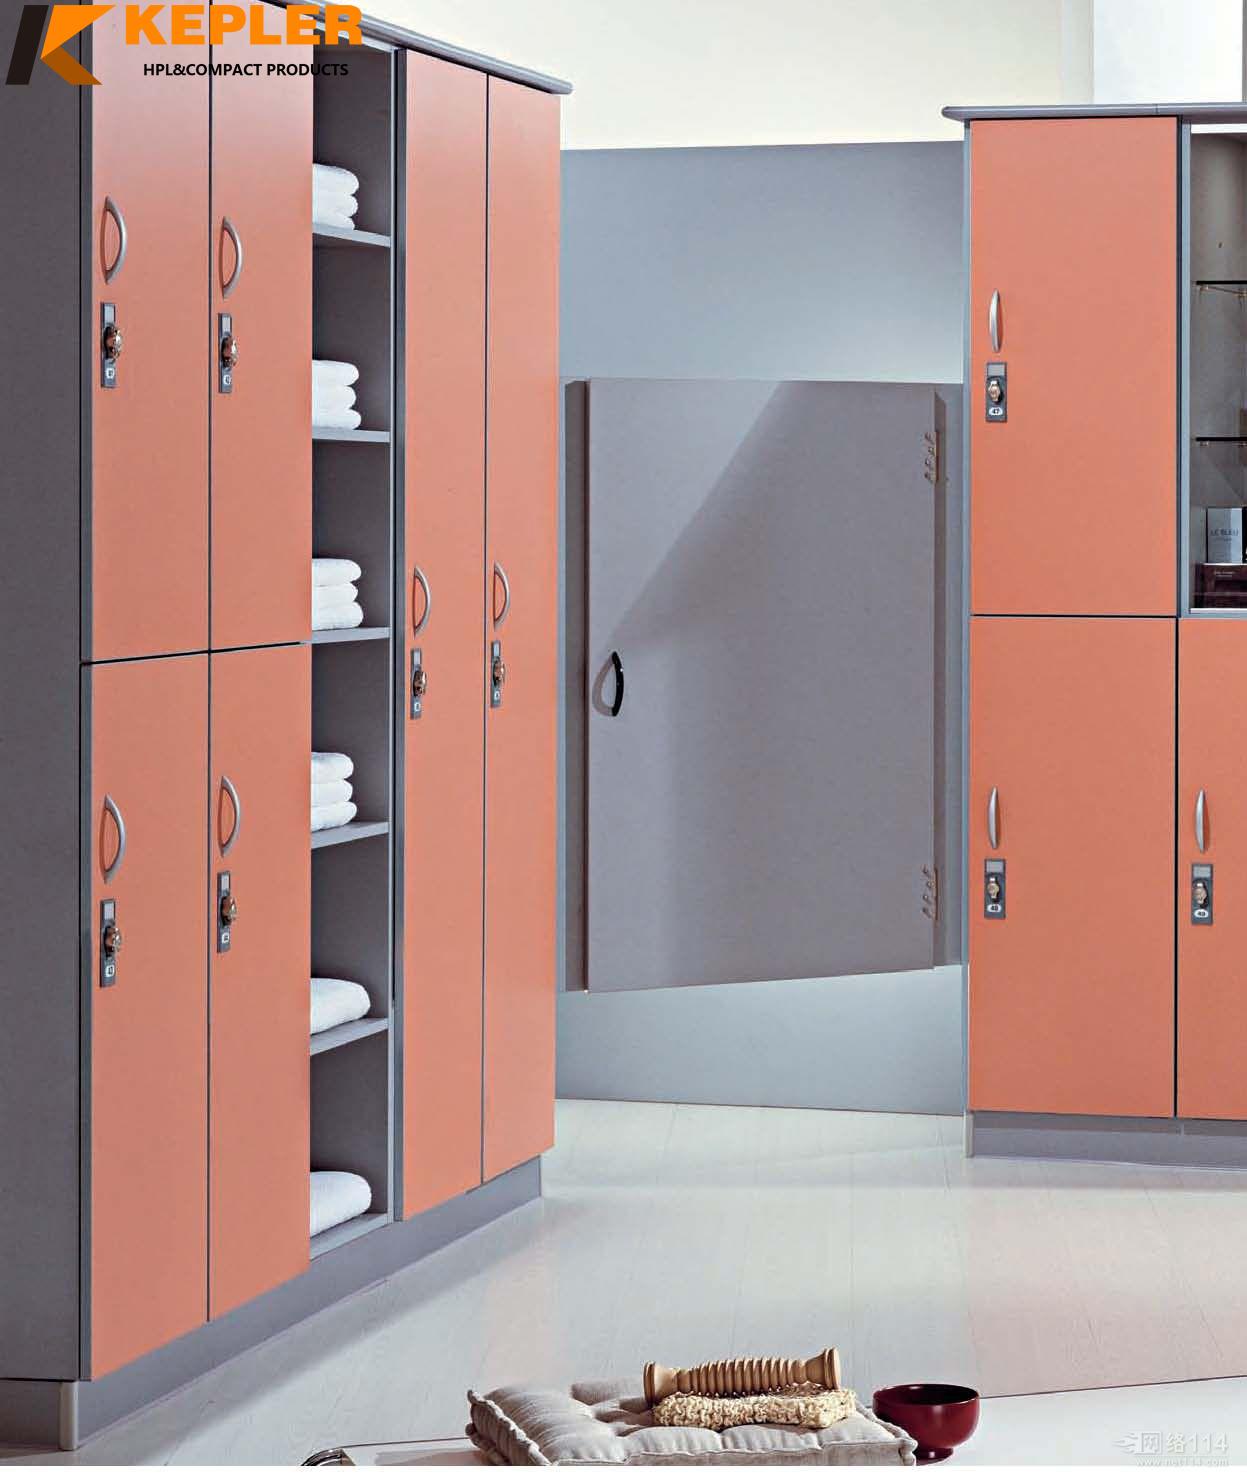 Kepler colorful storage lockers professional used gym compact laminate lockers for sale made in China